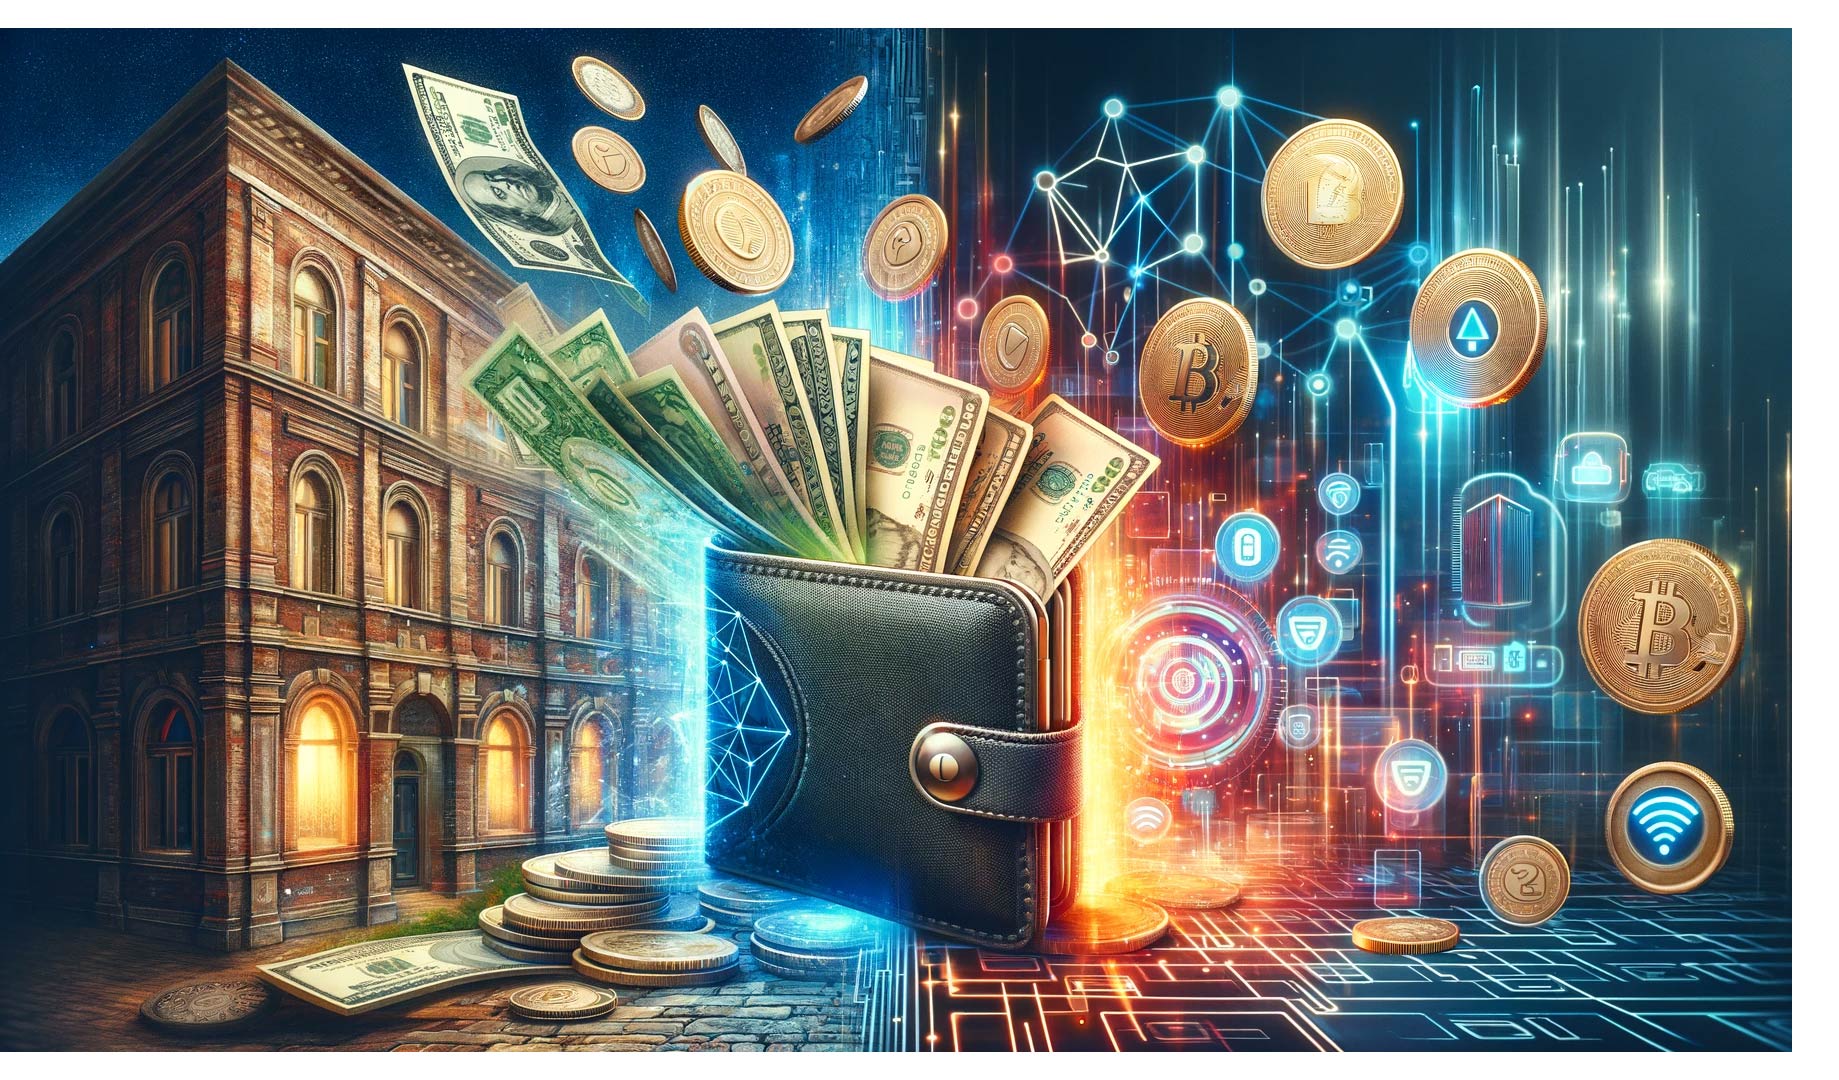 A futuristic, conceptually rich illustration representing the transition from physical cash to digital payments, symbolizing a cashless society